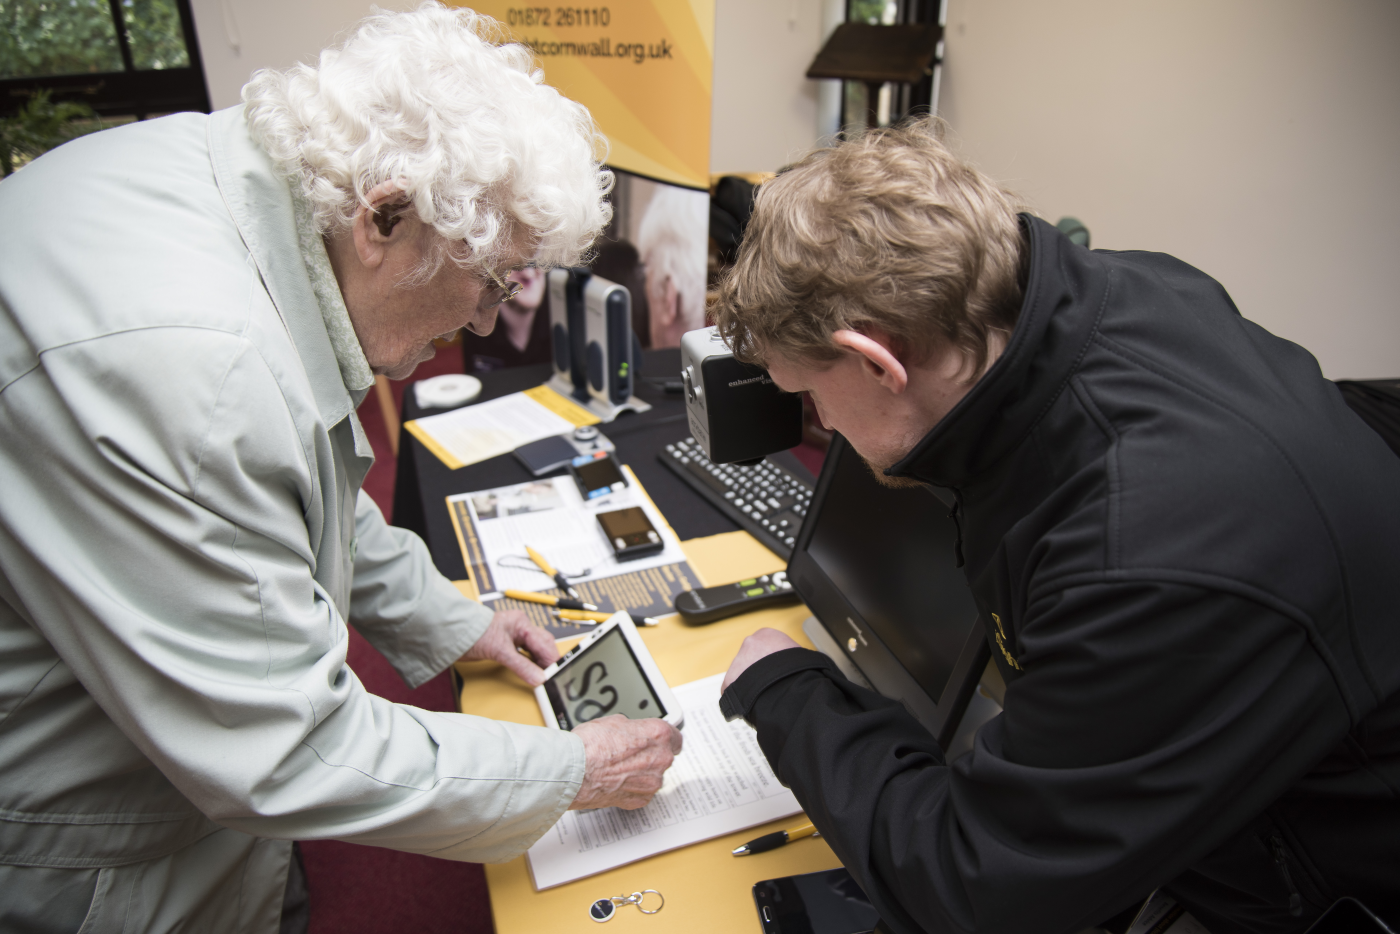 Dominic demonstrates an video magnifier to a client at a sight loss awareness event.